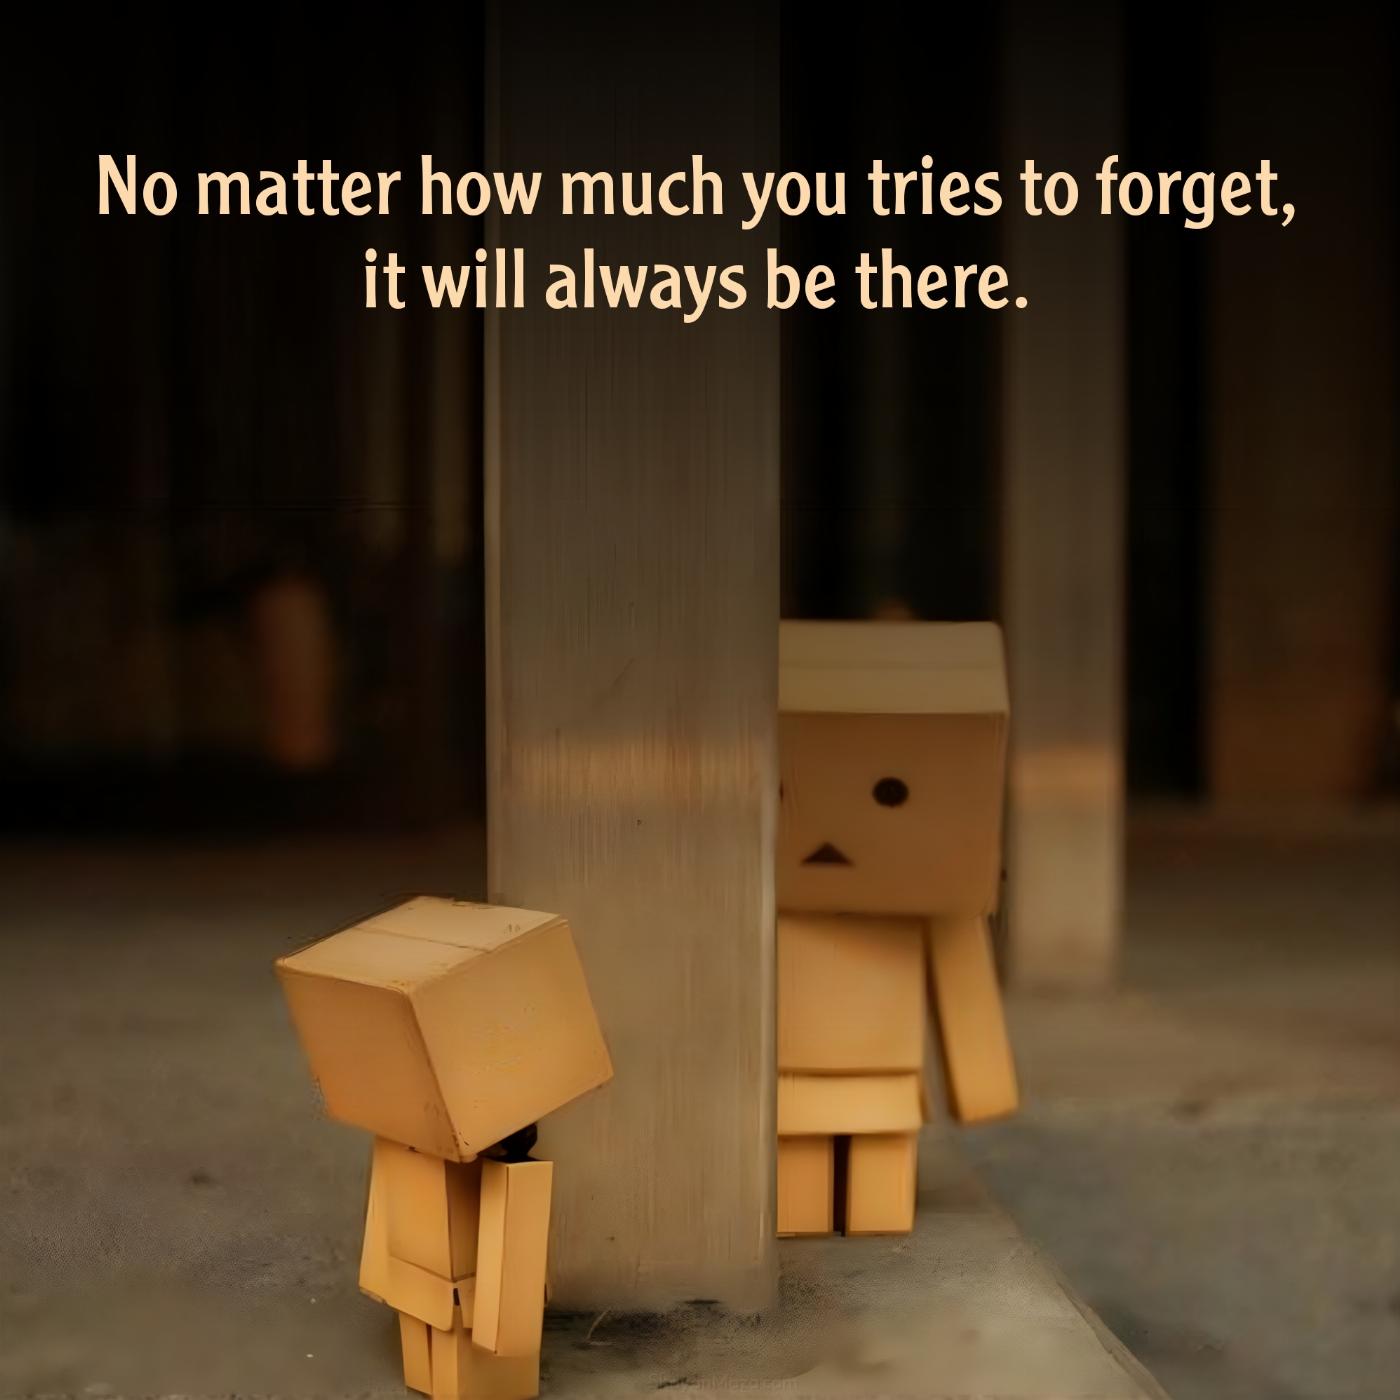 No matter how much you tries to forget